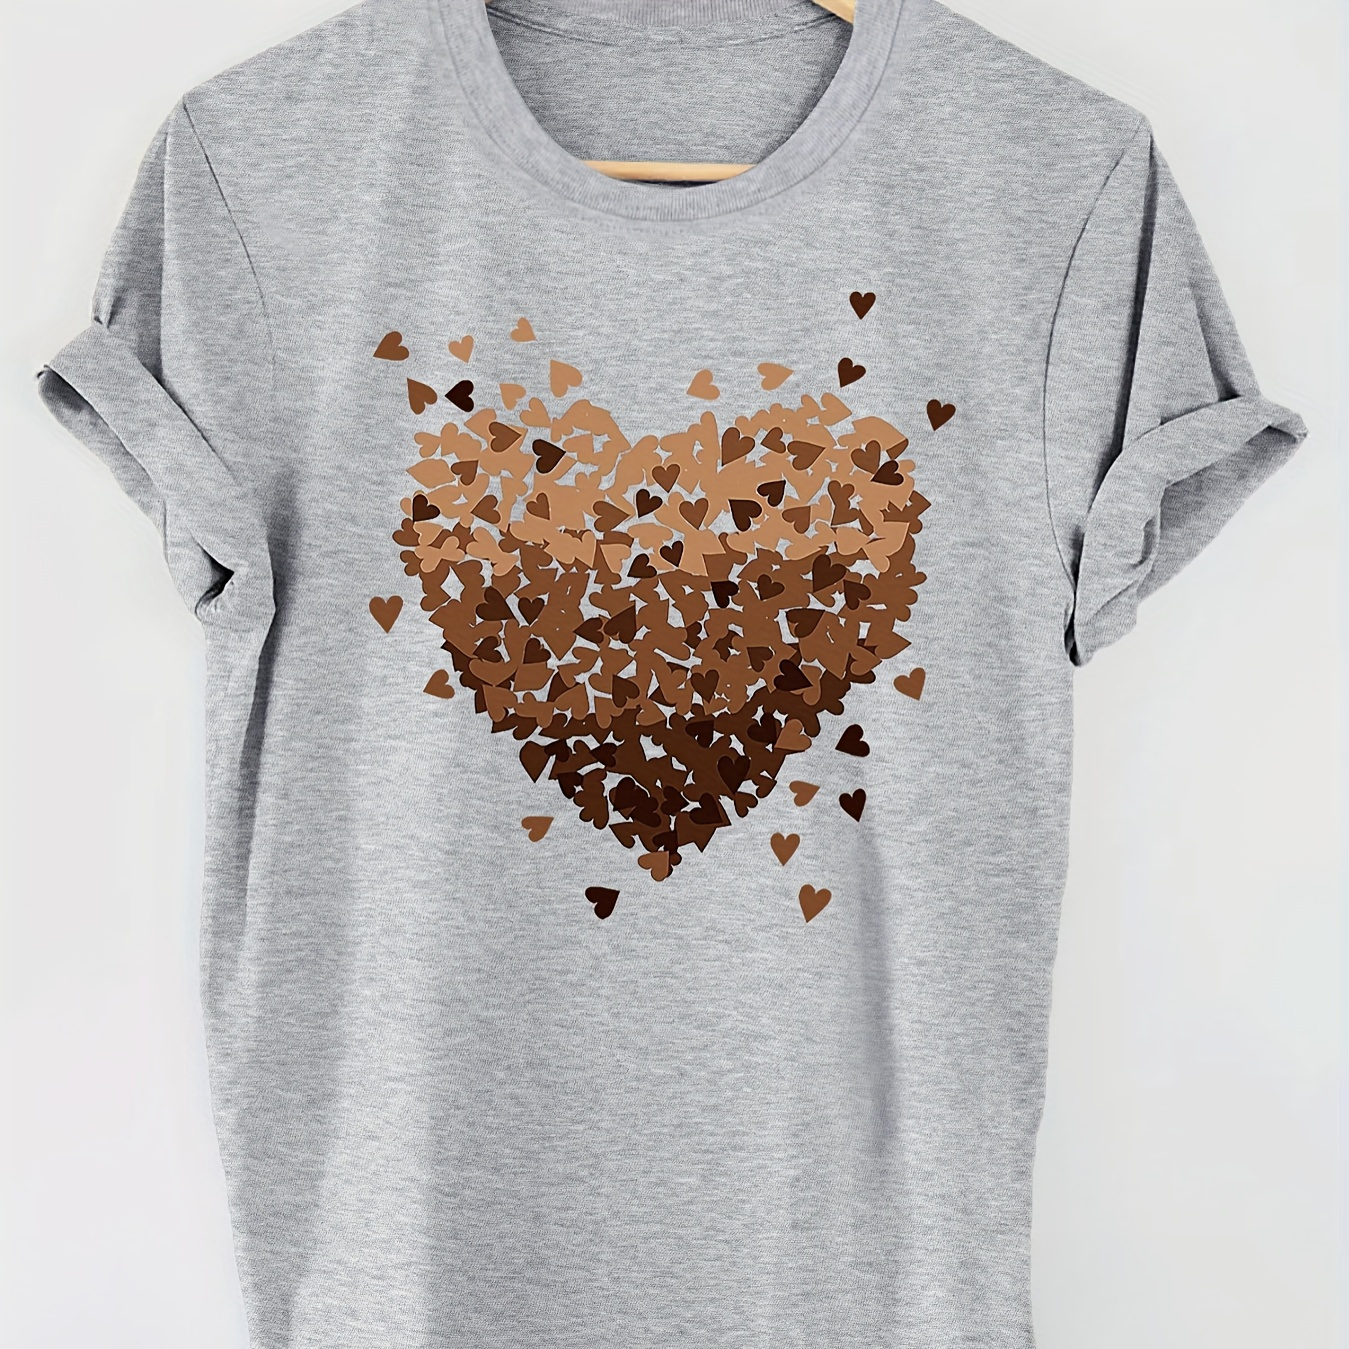 

Gradient Hearts Print T-shirt, Short Sleeve Crew Neck Casual Top For Summer & Spring, Women's Clothing